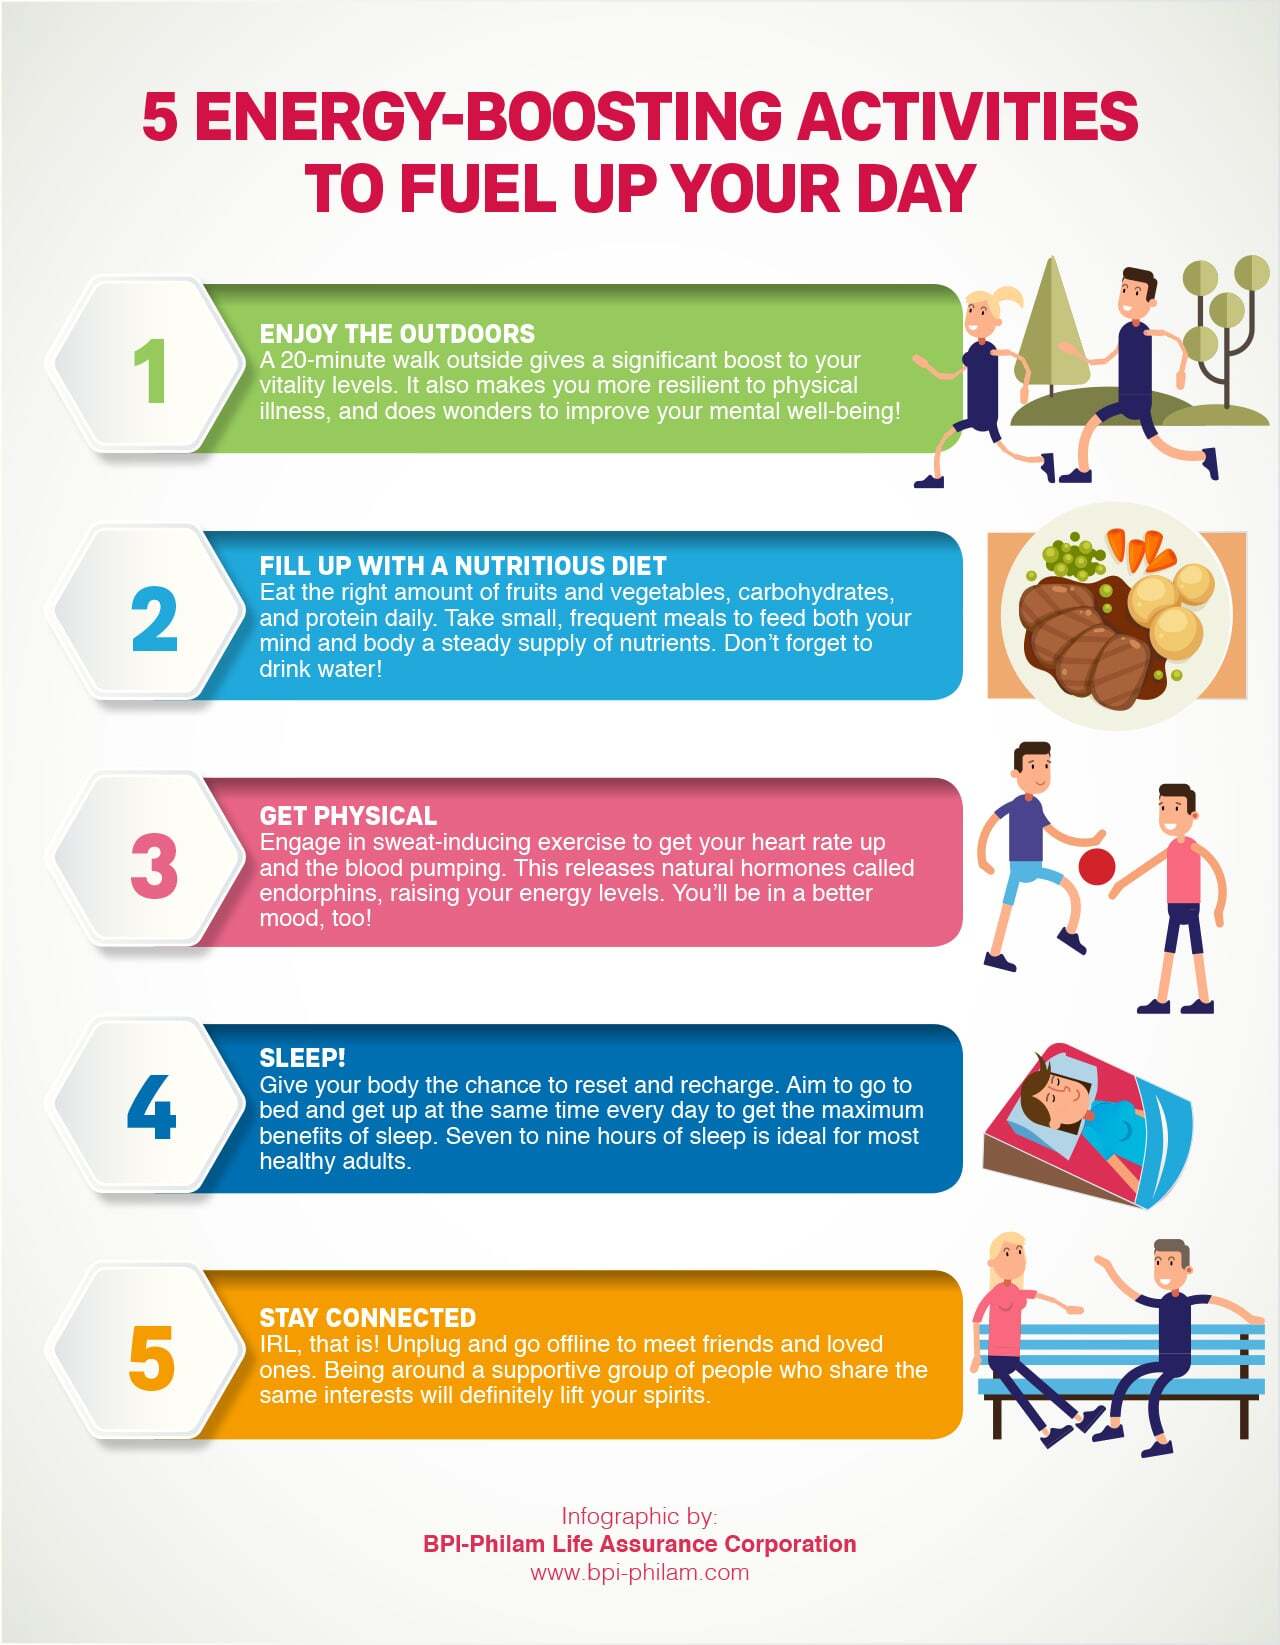 [Infographic] 5 Energy-boosting Activities to Fuel Up Your Day